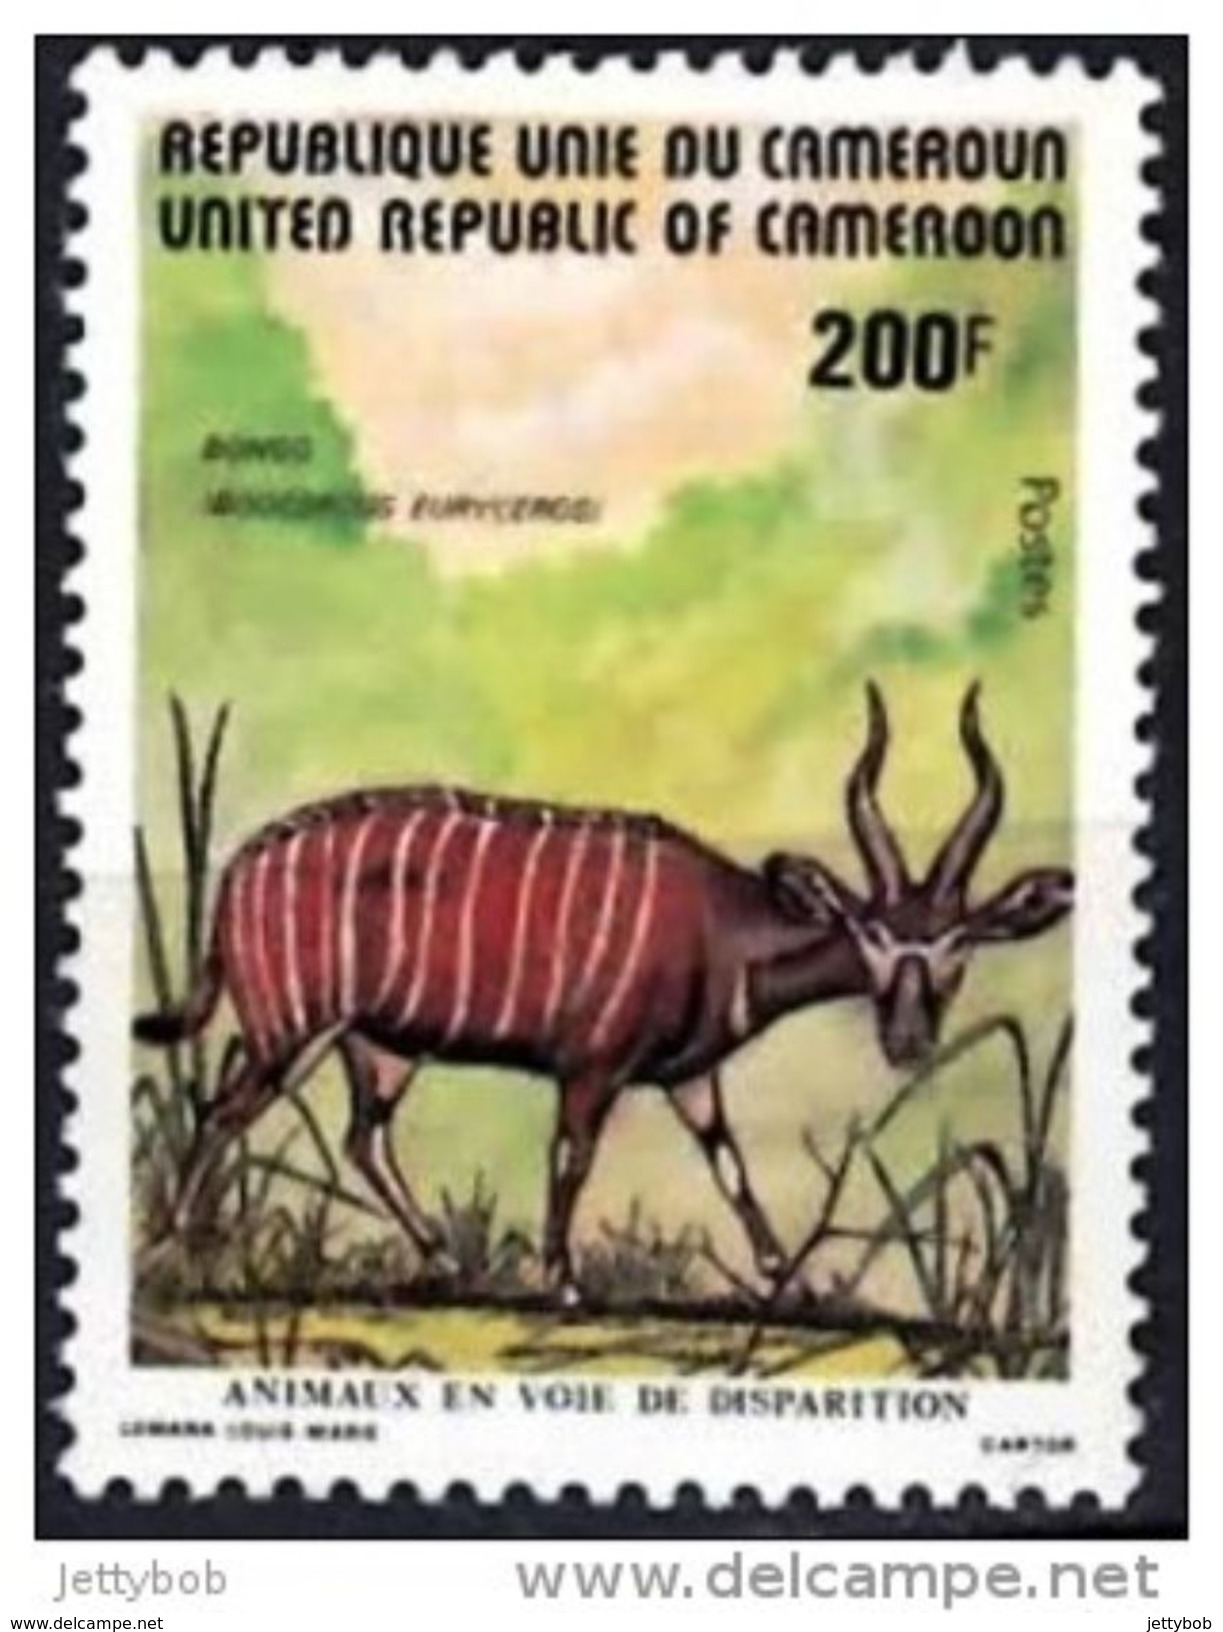 CAMEROON 1982 Endangered Animals 200f Mint Unmounted - Cameroon (1960-...)